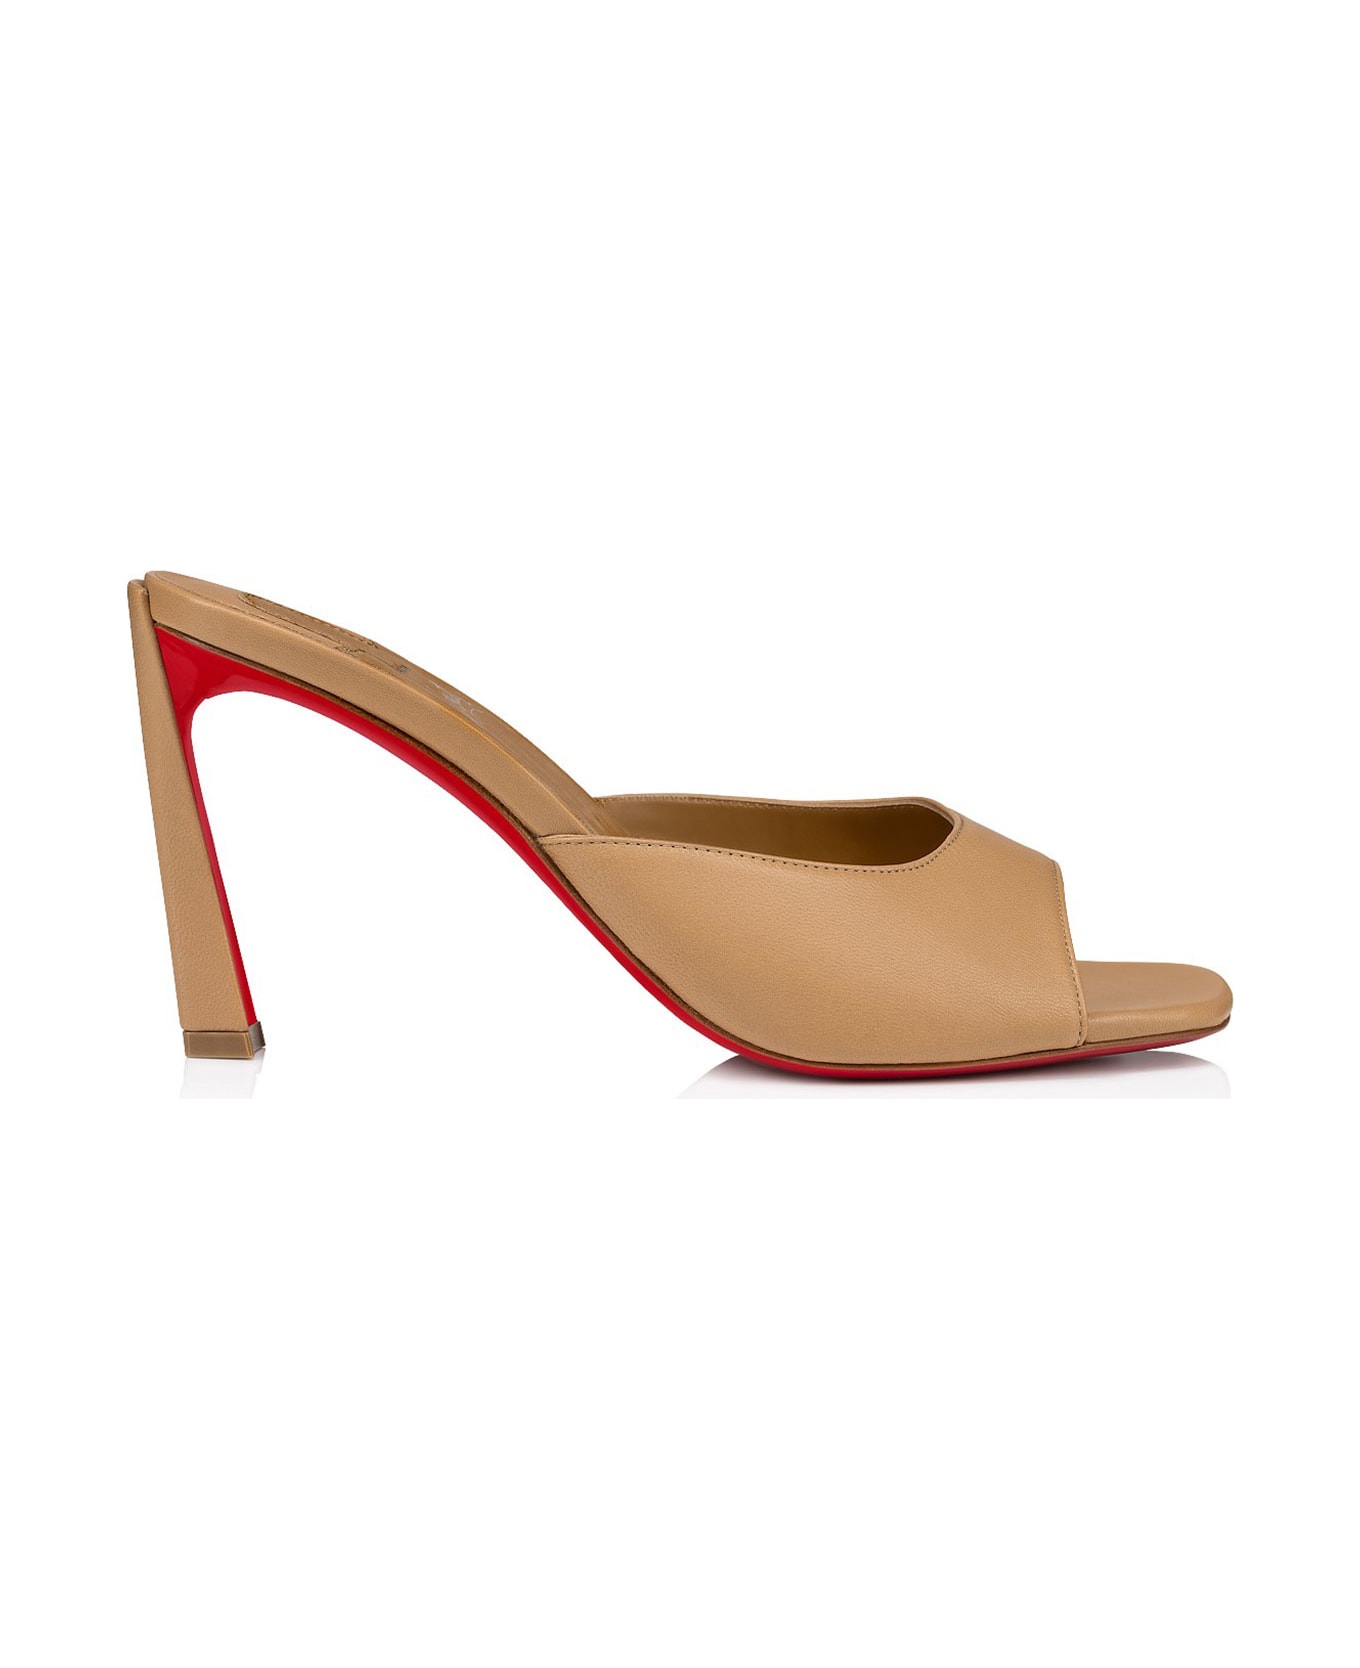 Christian Louboutin Mules Condora In Brown Leather With Heel - TOFFEE LIN TOFFEE